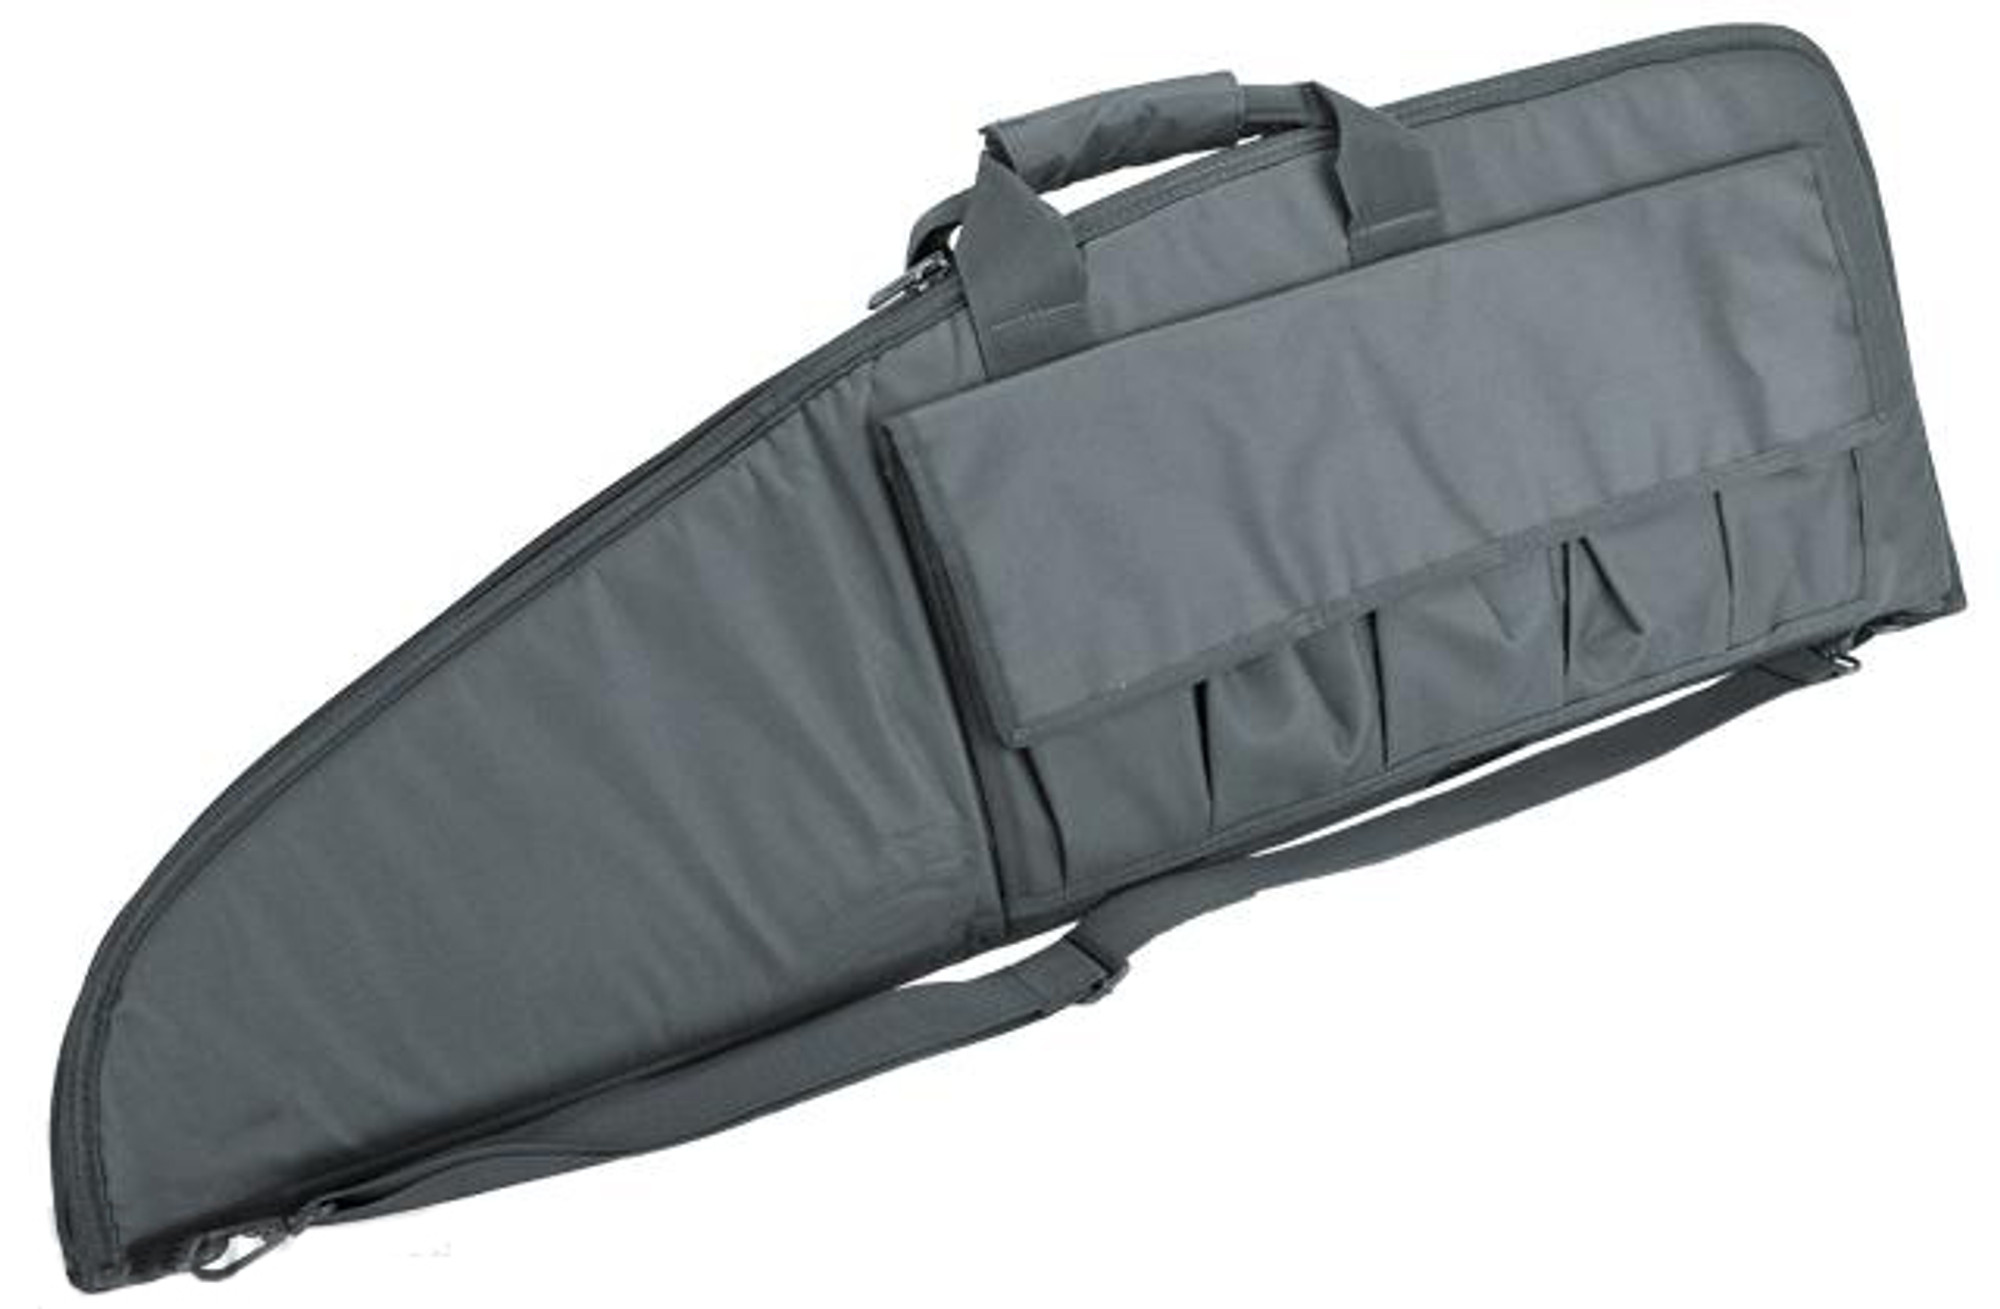 NcSTAR Tactical Deluxe Padded Rifle Bag w/ Built-in mag pouches - 38" (Urban Grey)